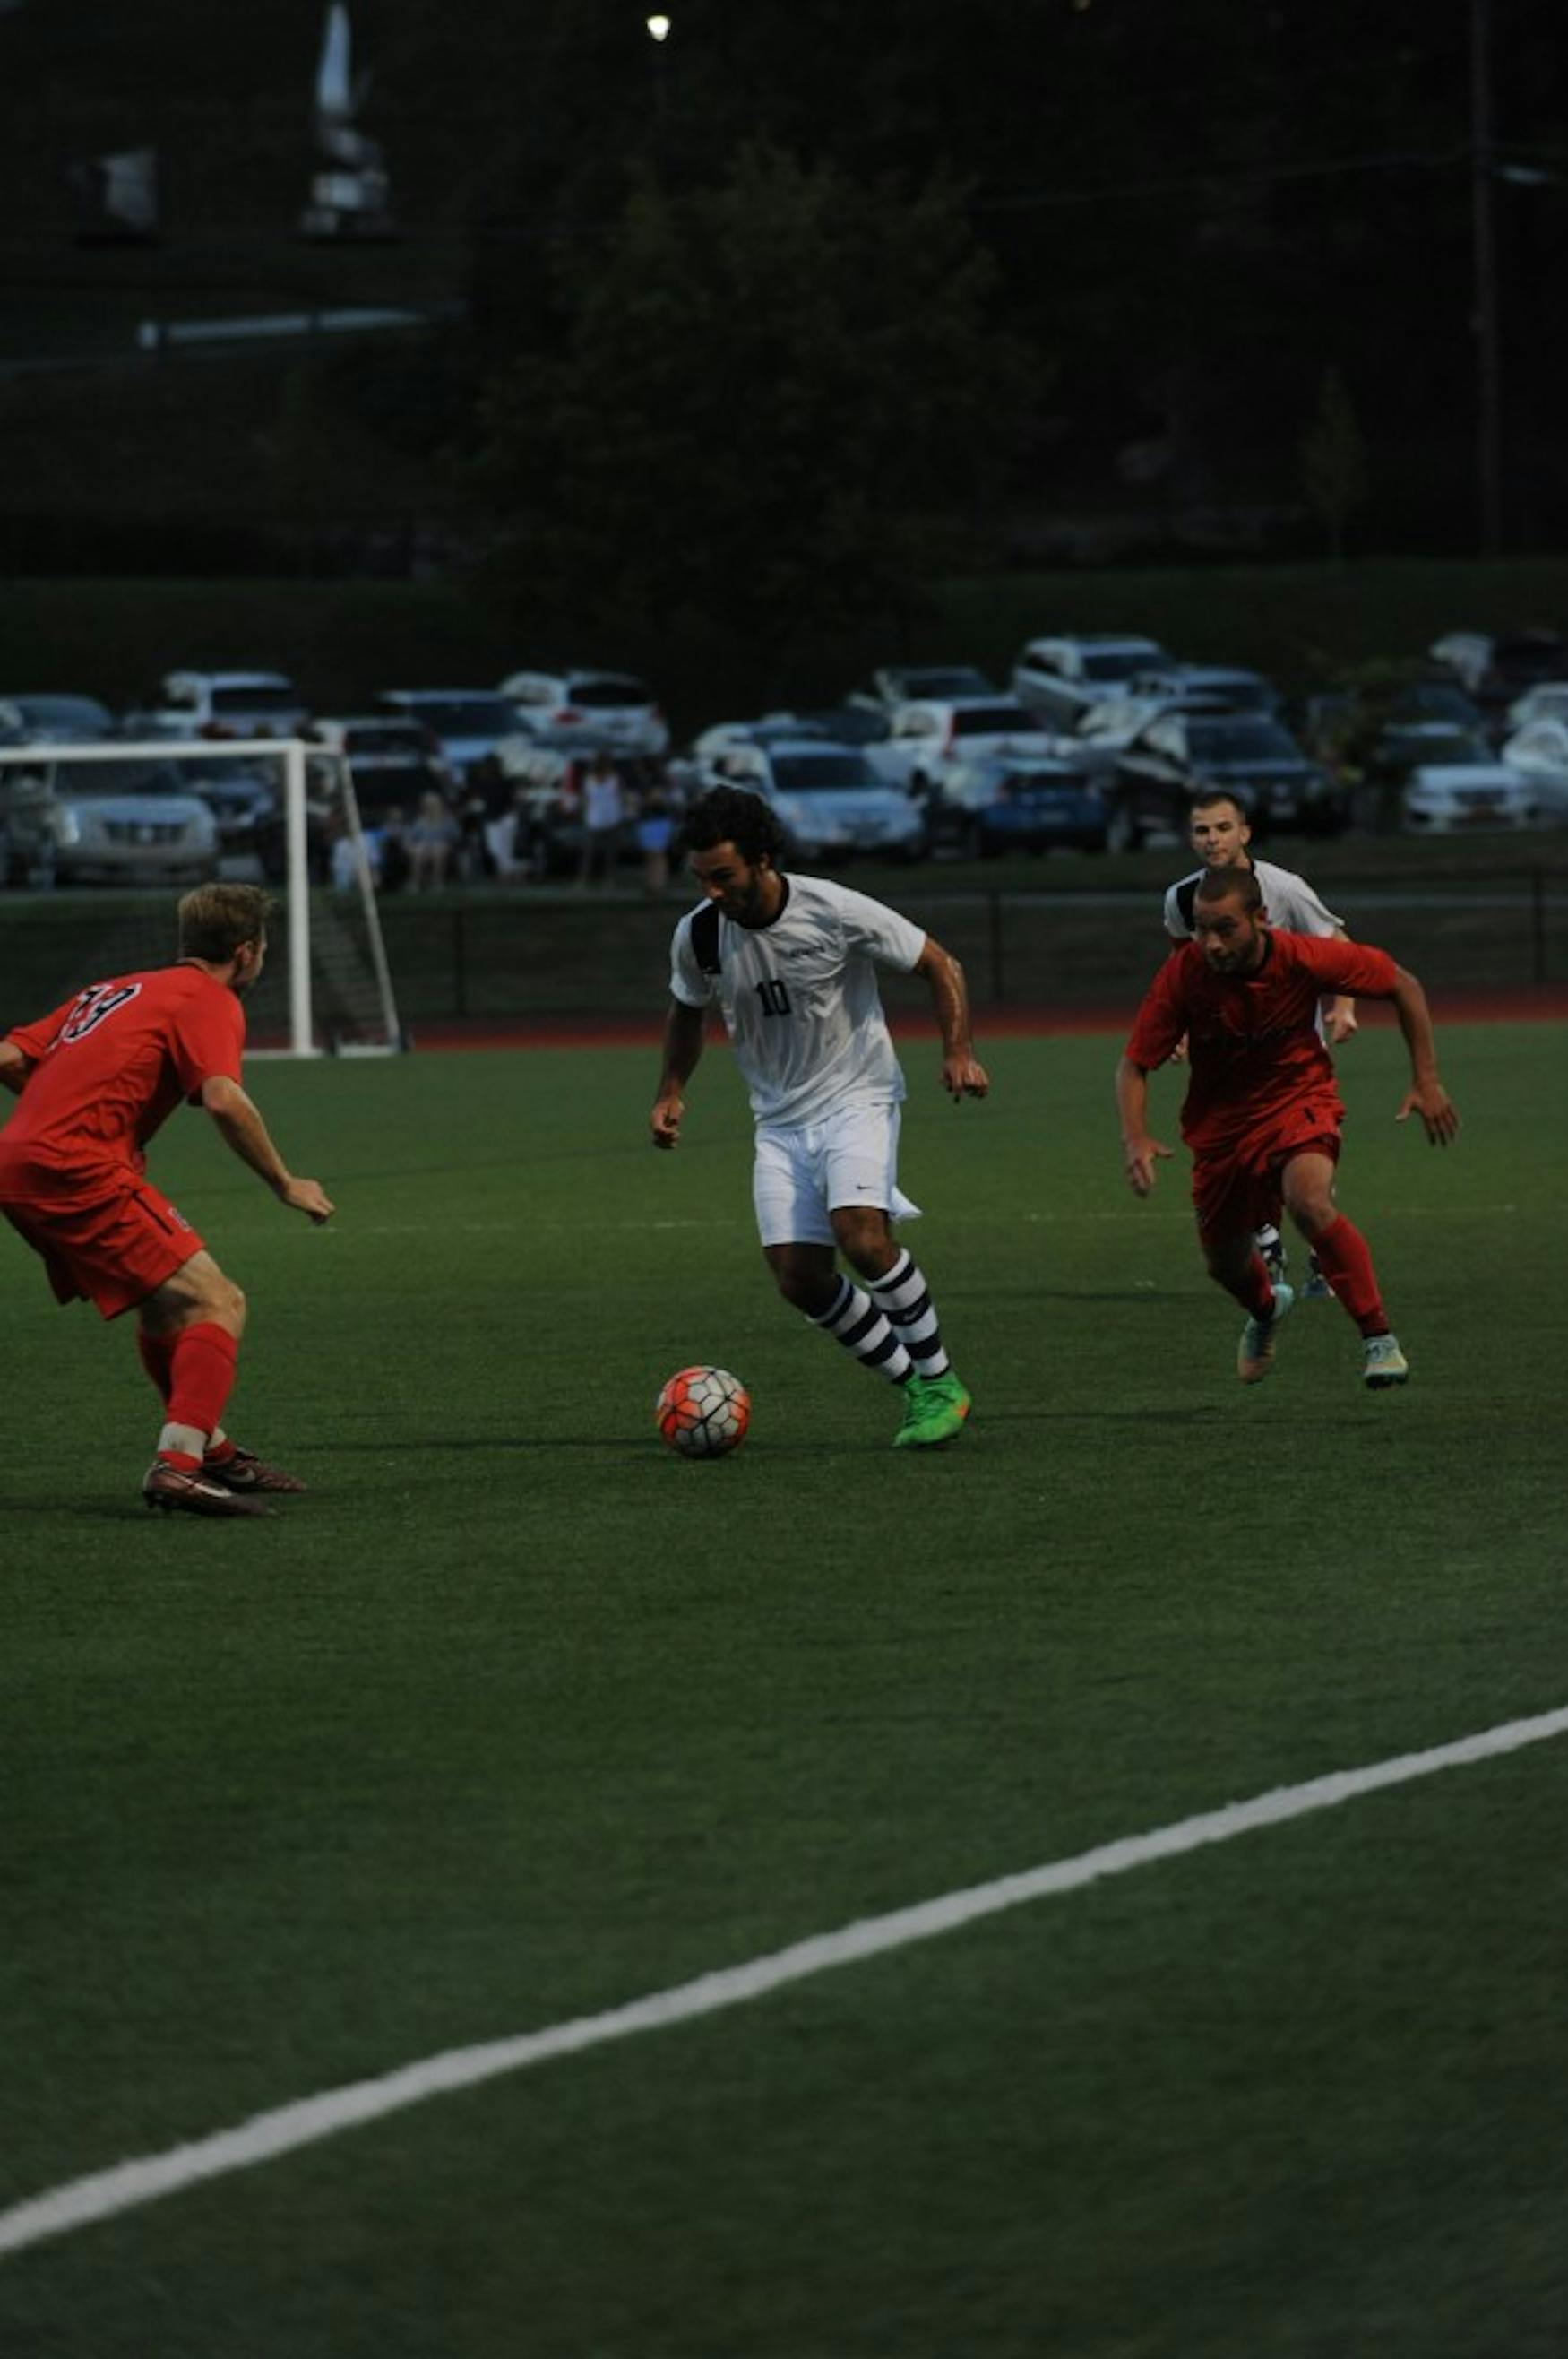 QUICK DRIBBLE: Forward Zach Viera ’17 dribbles the ball upfield against Bridgewater State University this past Tuesday night.